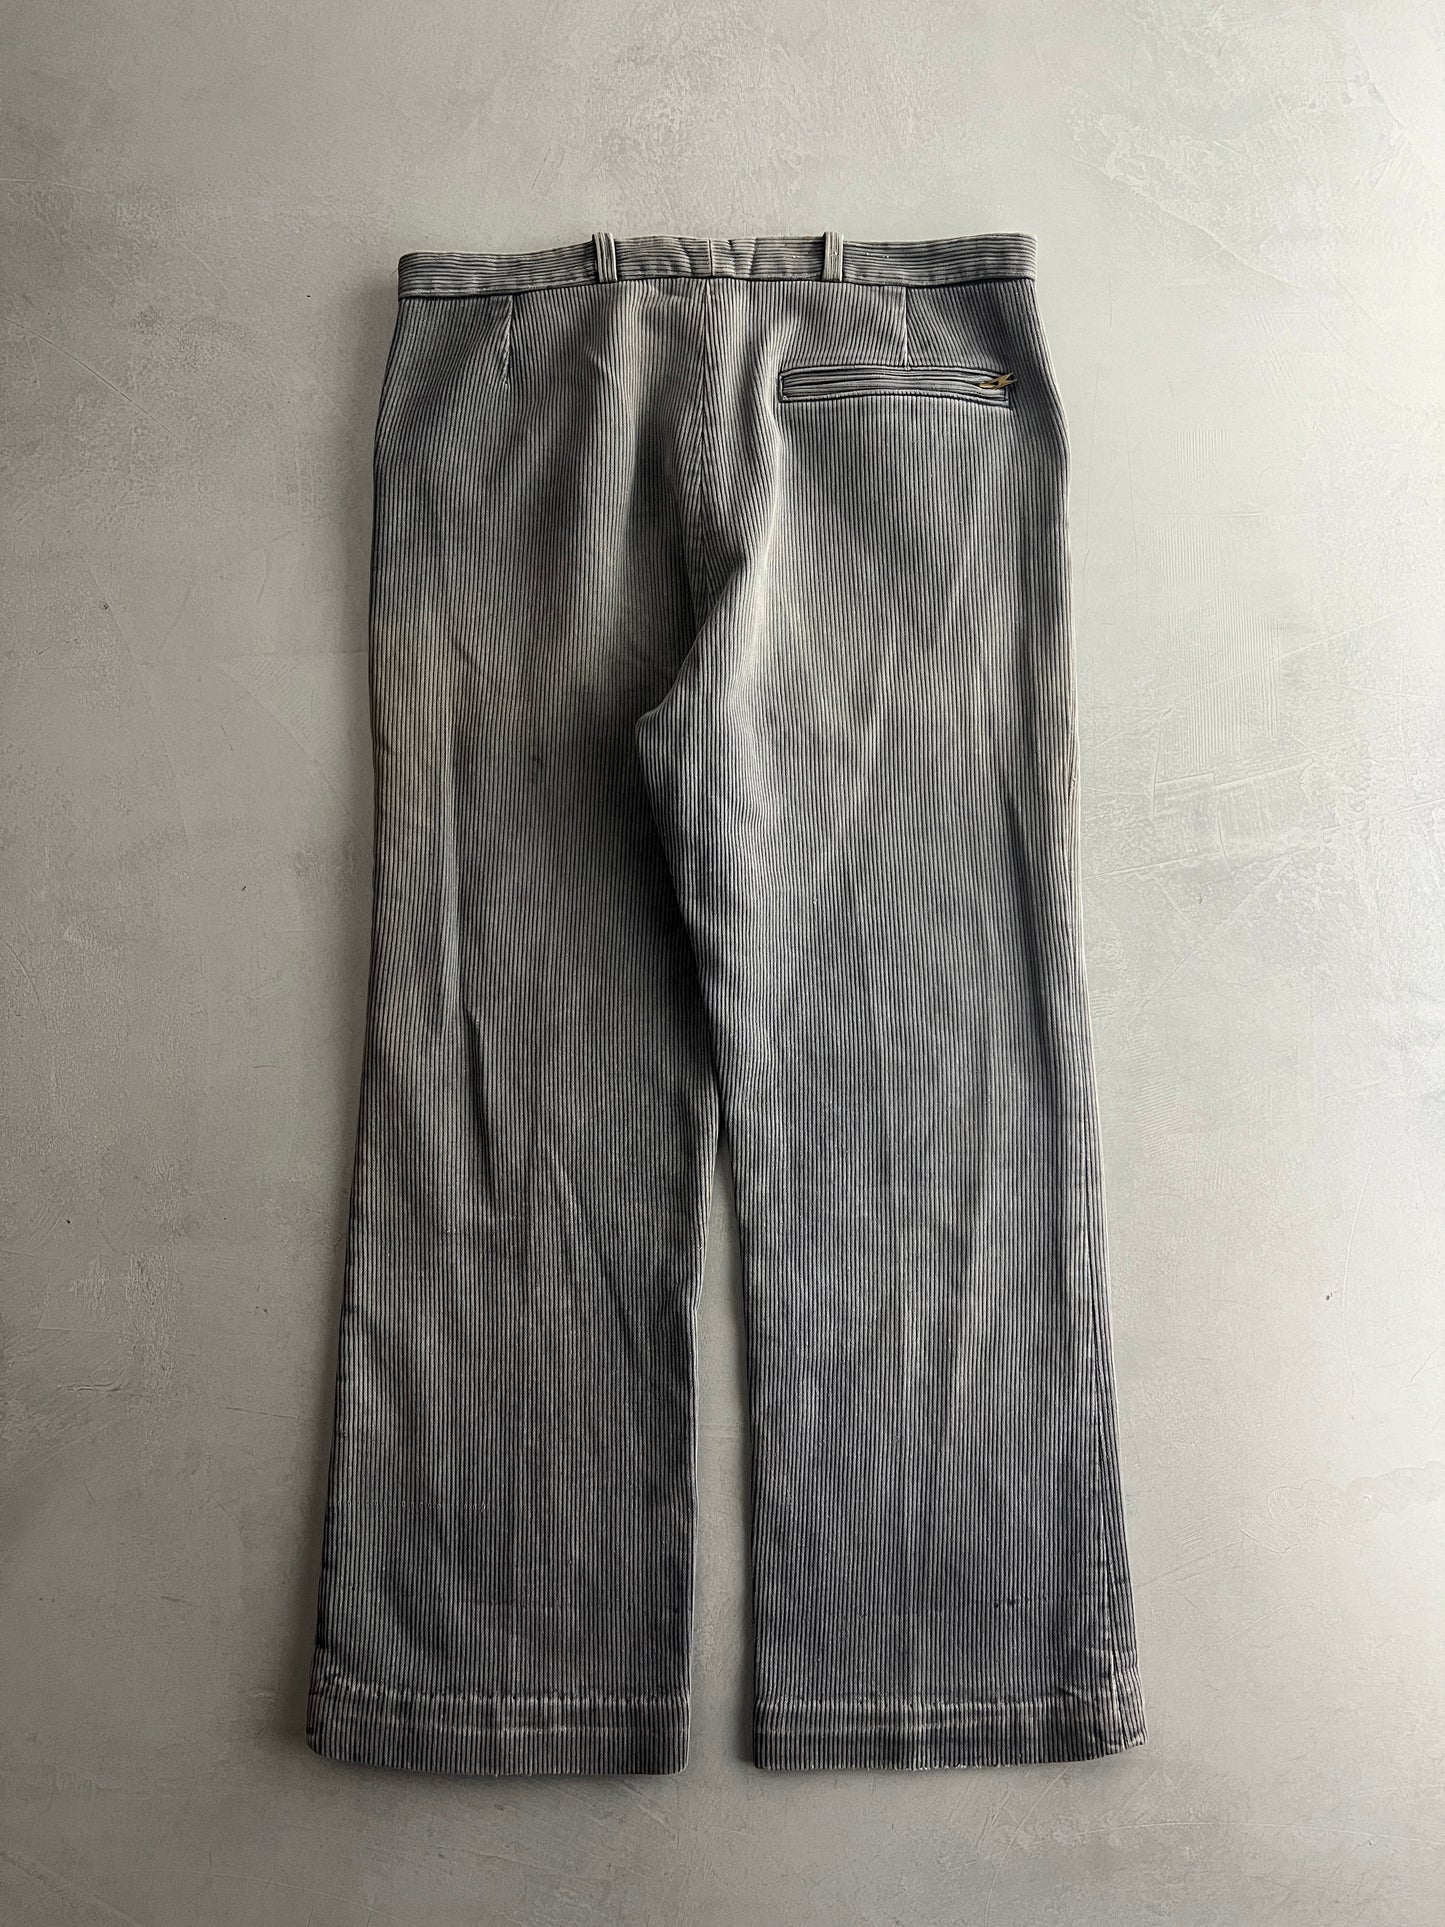 40's French Cord Work Pants [34"]